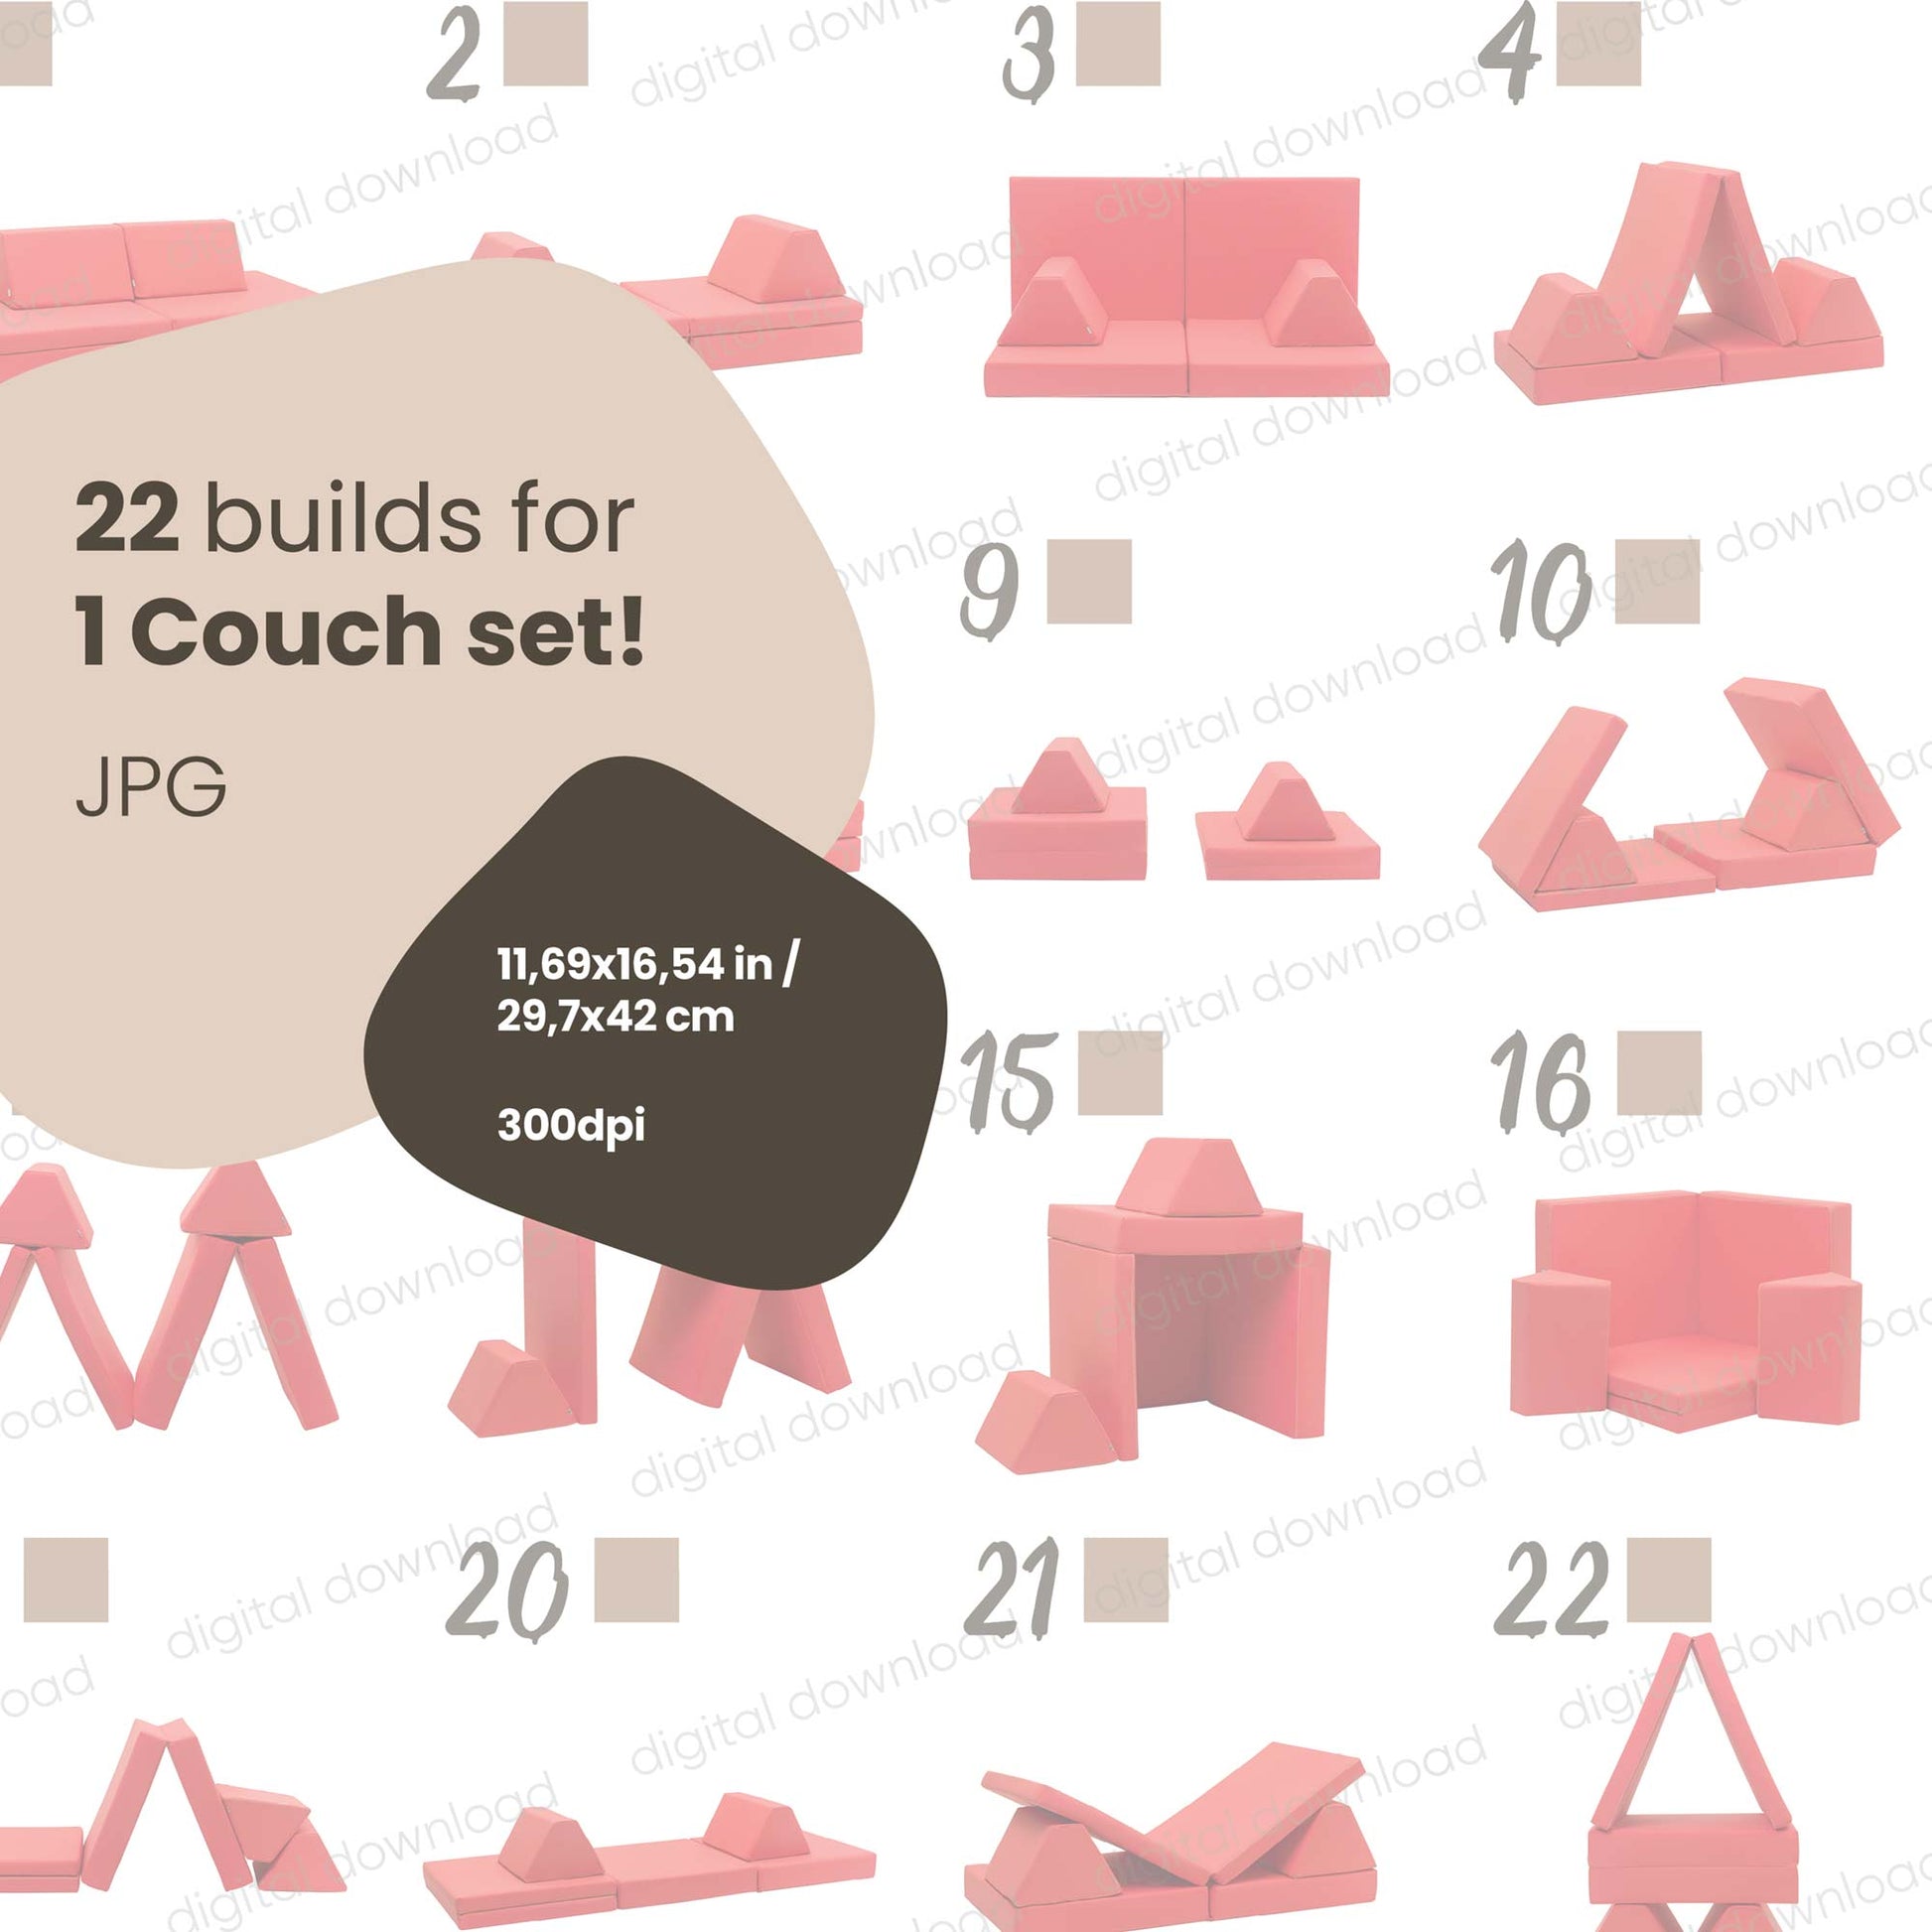 Digita poster for Soft play blocks build ideas. Poster includes 22 builds for 1 couch set